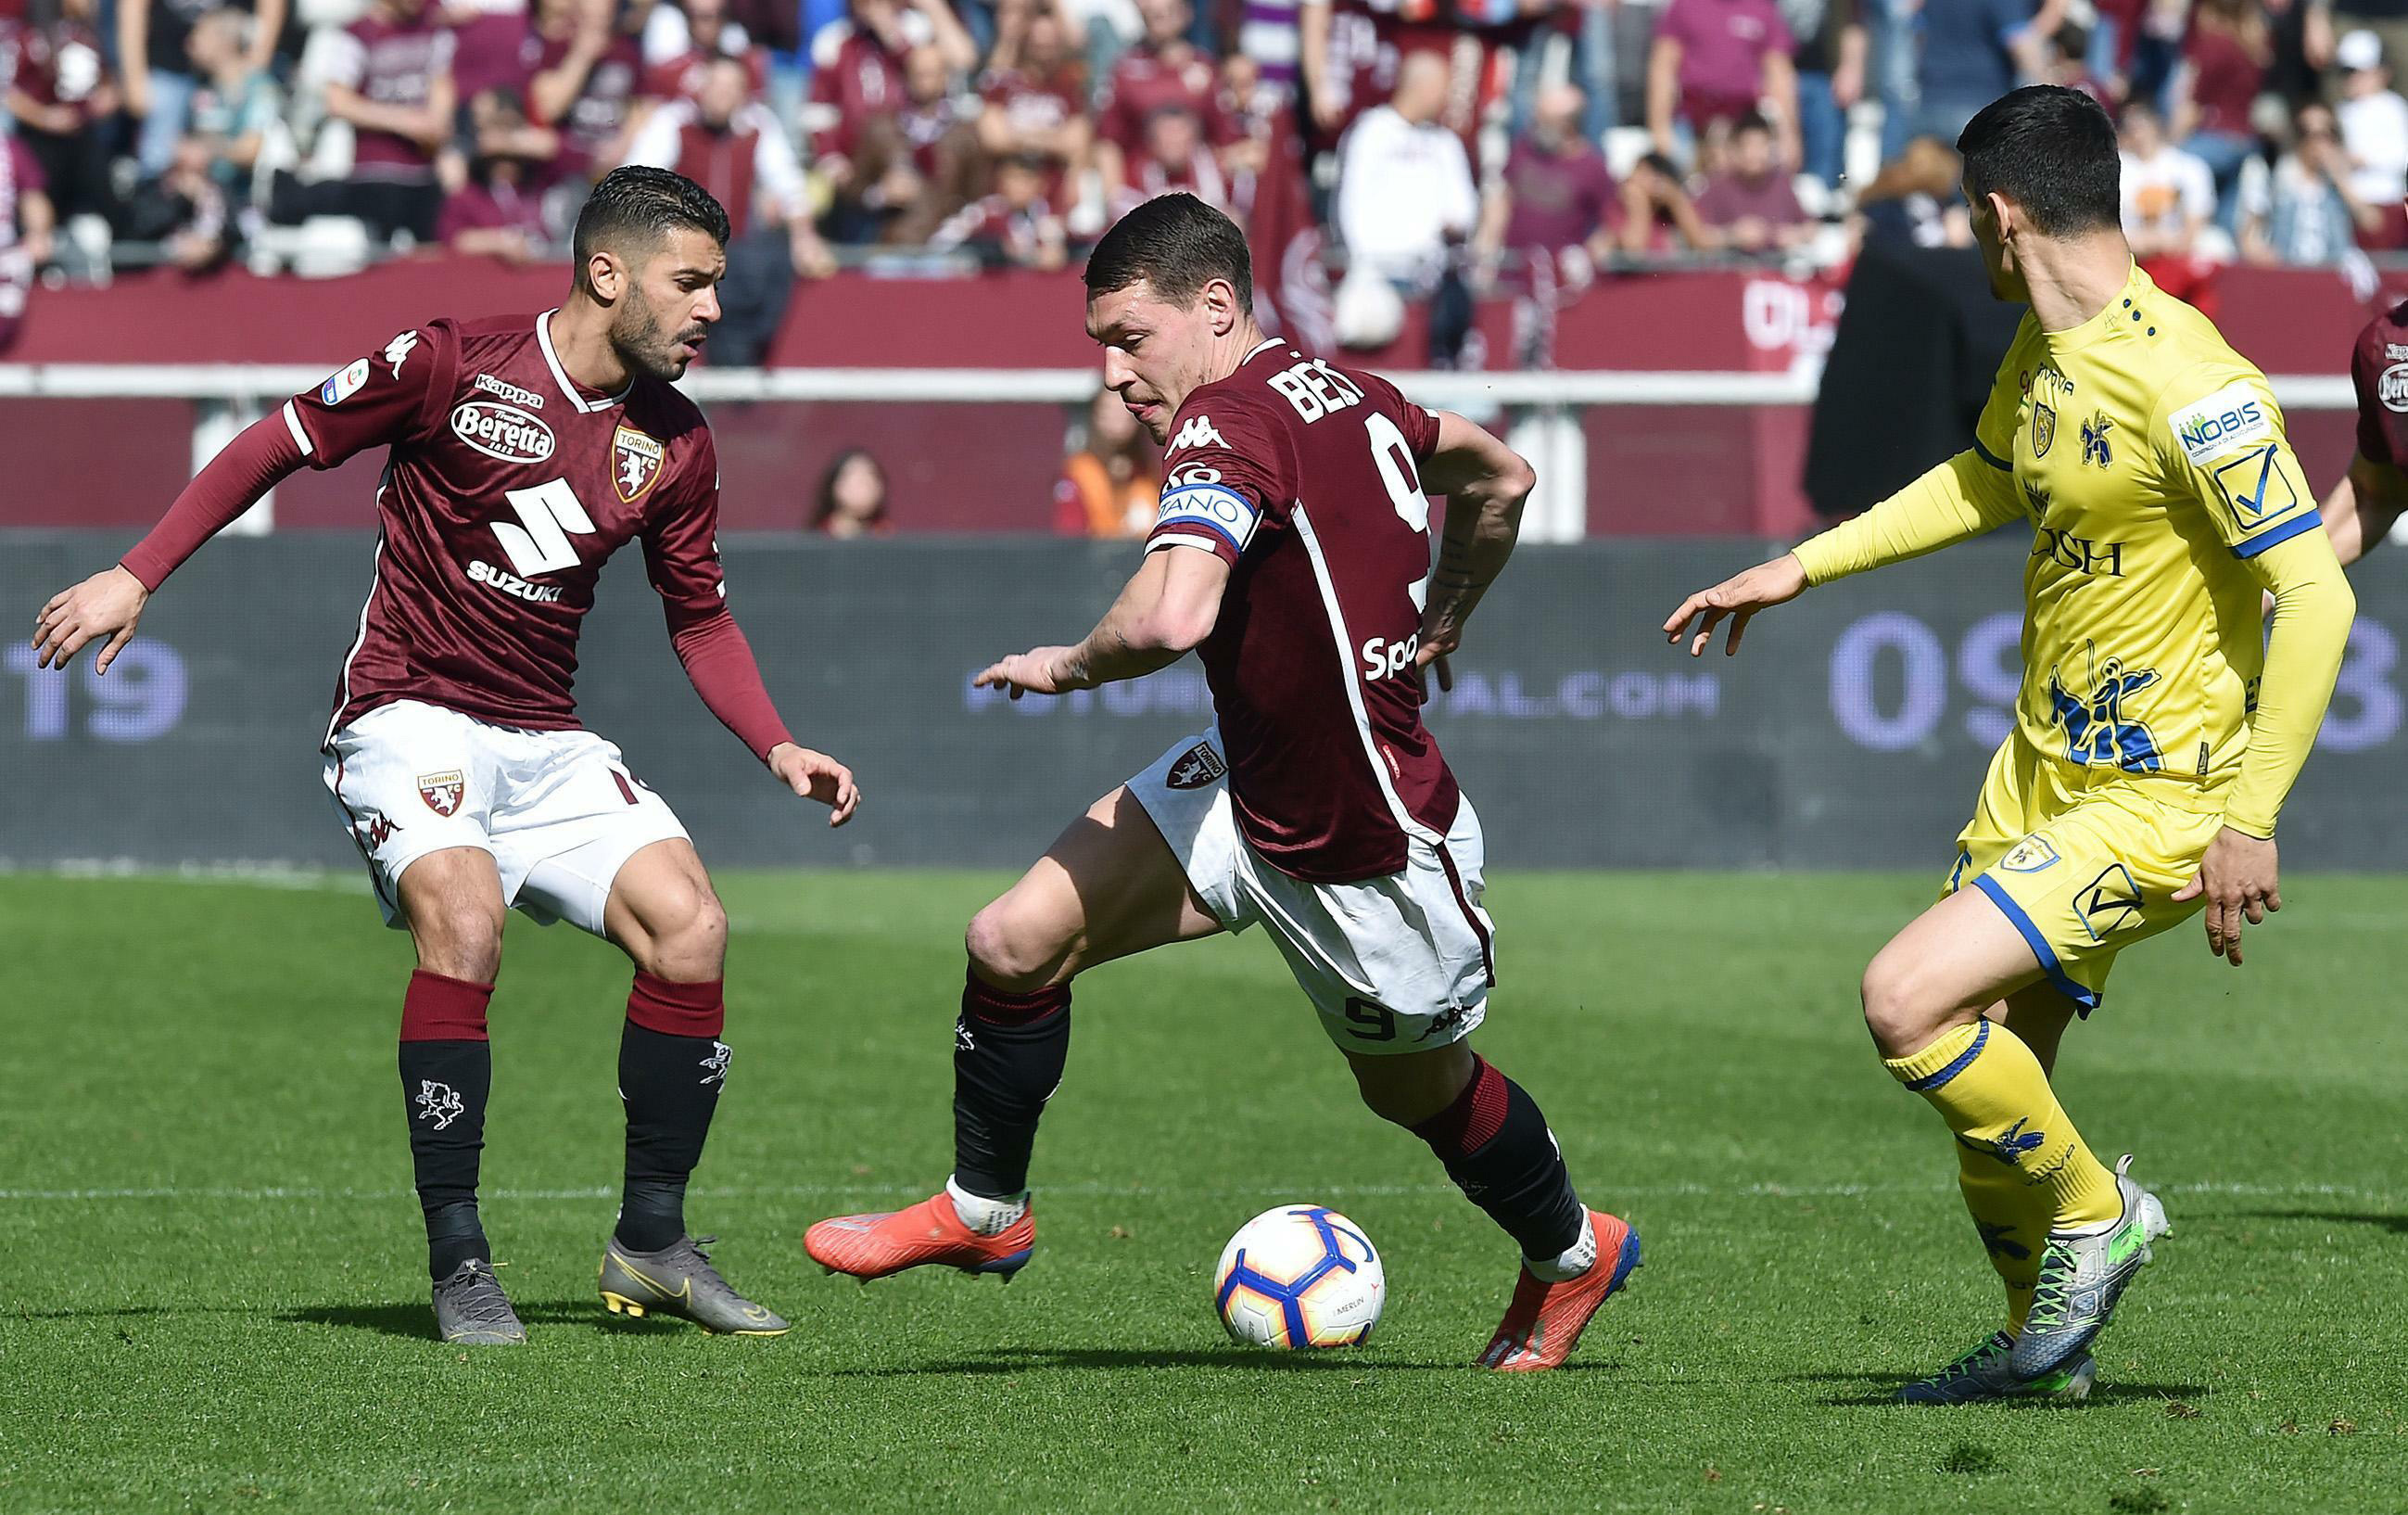 Torino moves into contention for Europa League places